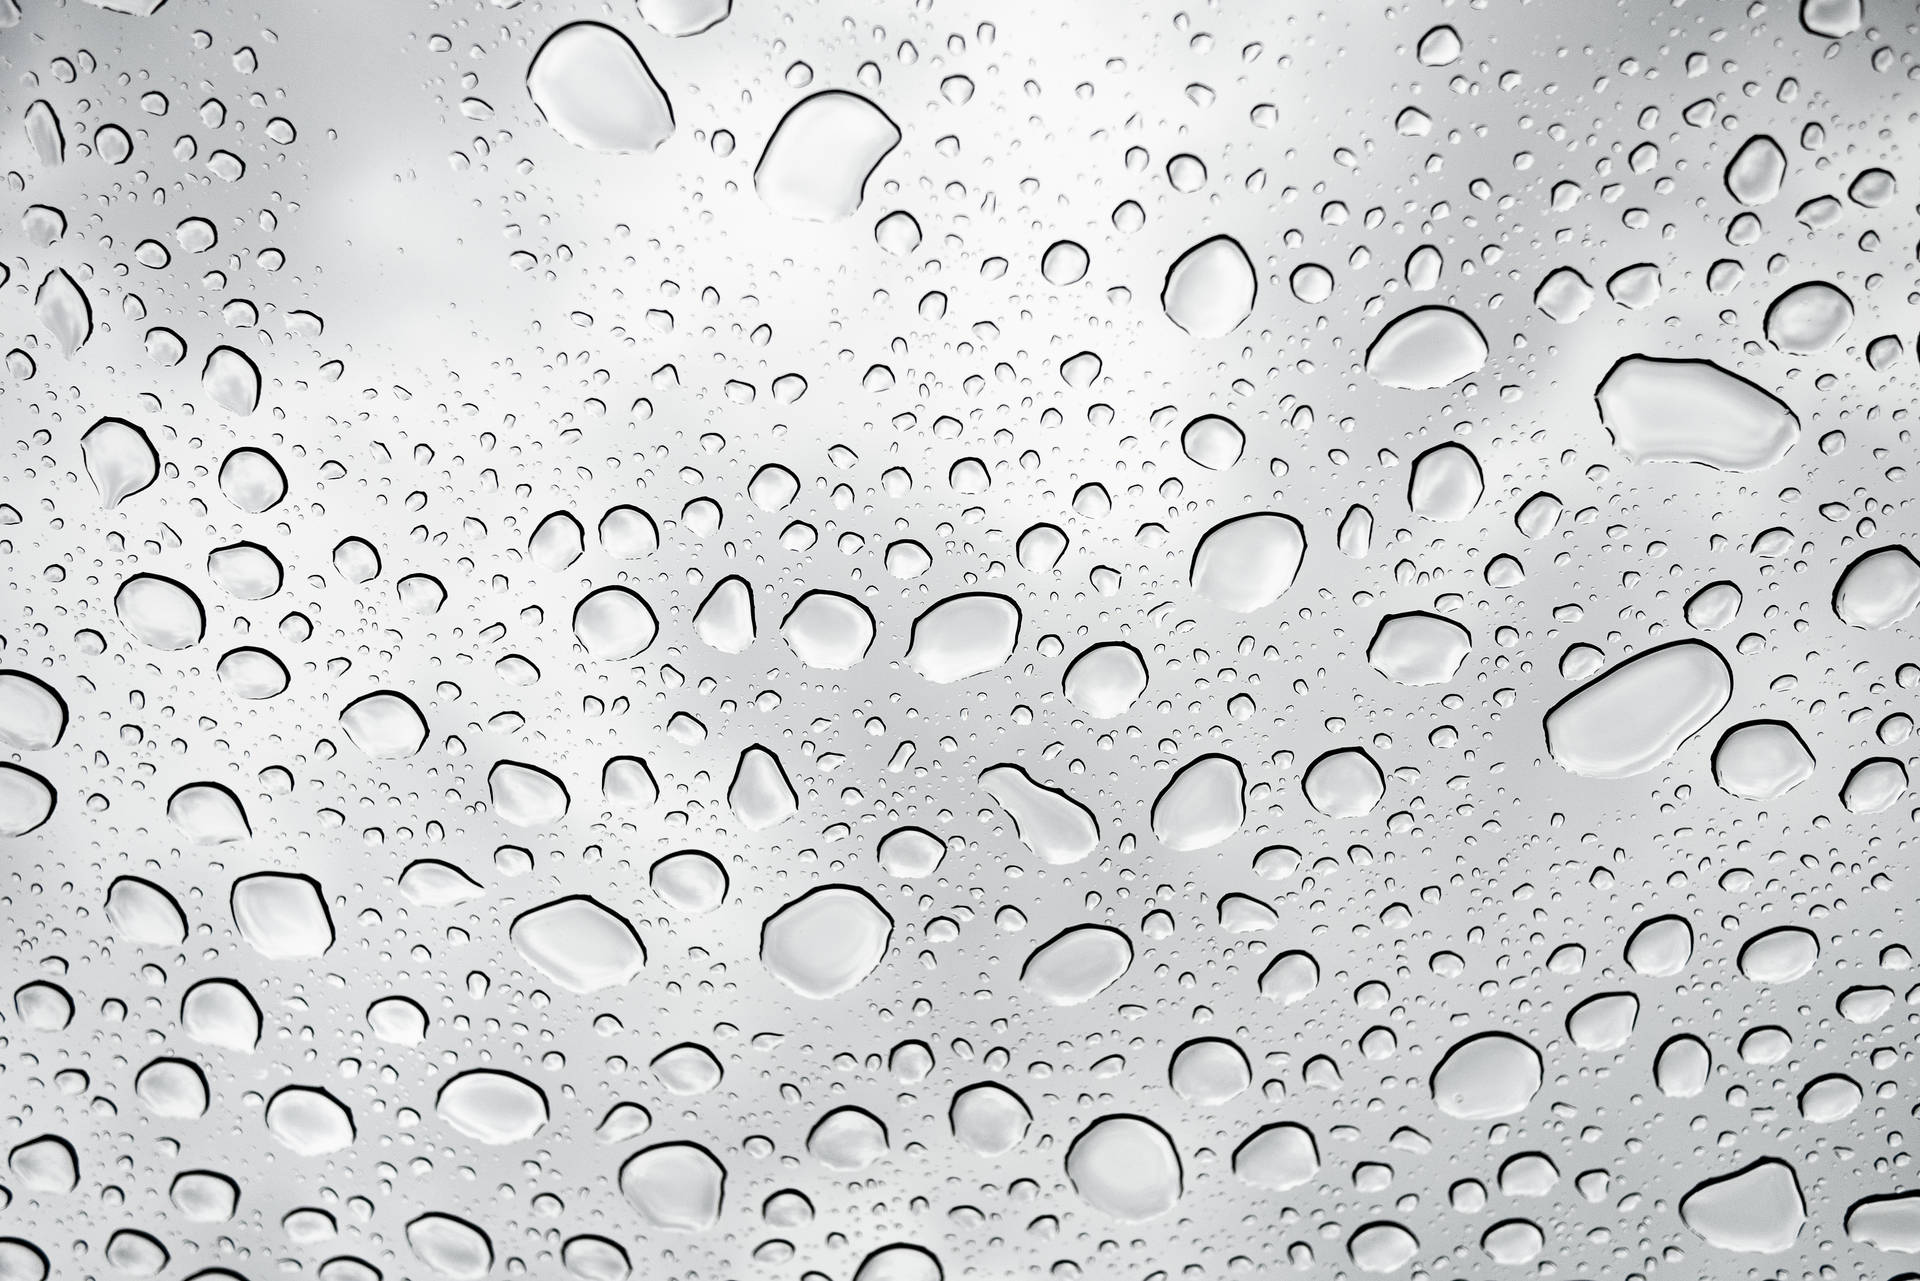 Raining Droplets On Glass Surface